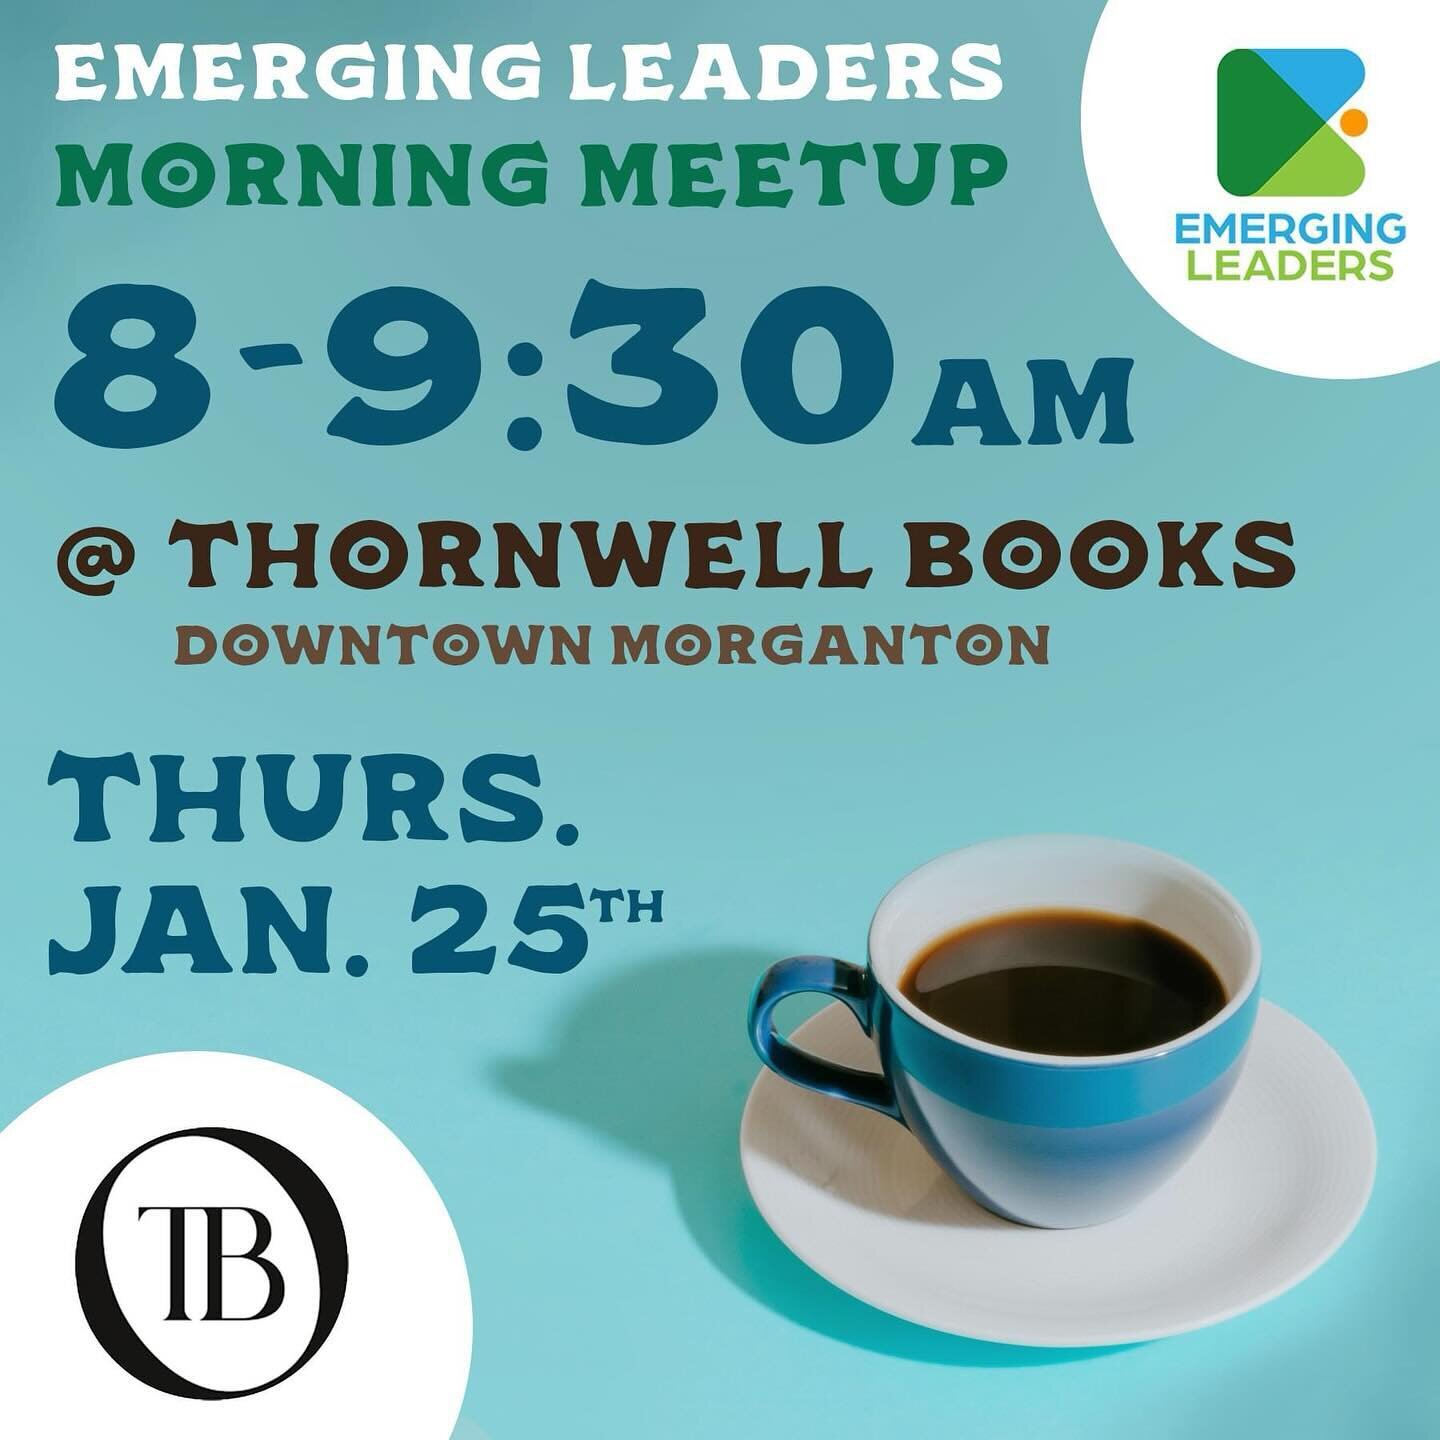 Happy New Year #EmergingLeaders!
☕🫖 Join us next Thursday, January 25th for a Morning Meetup at @thornwellbooks in @downtown_motown from 8 - 9:30 am!
Meet and catch up with other young professionals in and around Burke County and grab some coffee, t